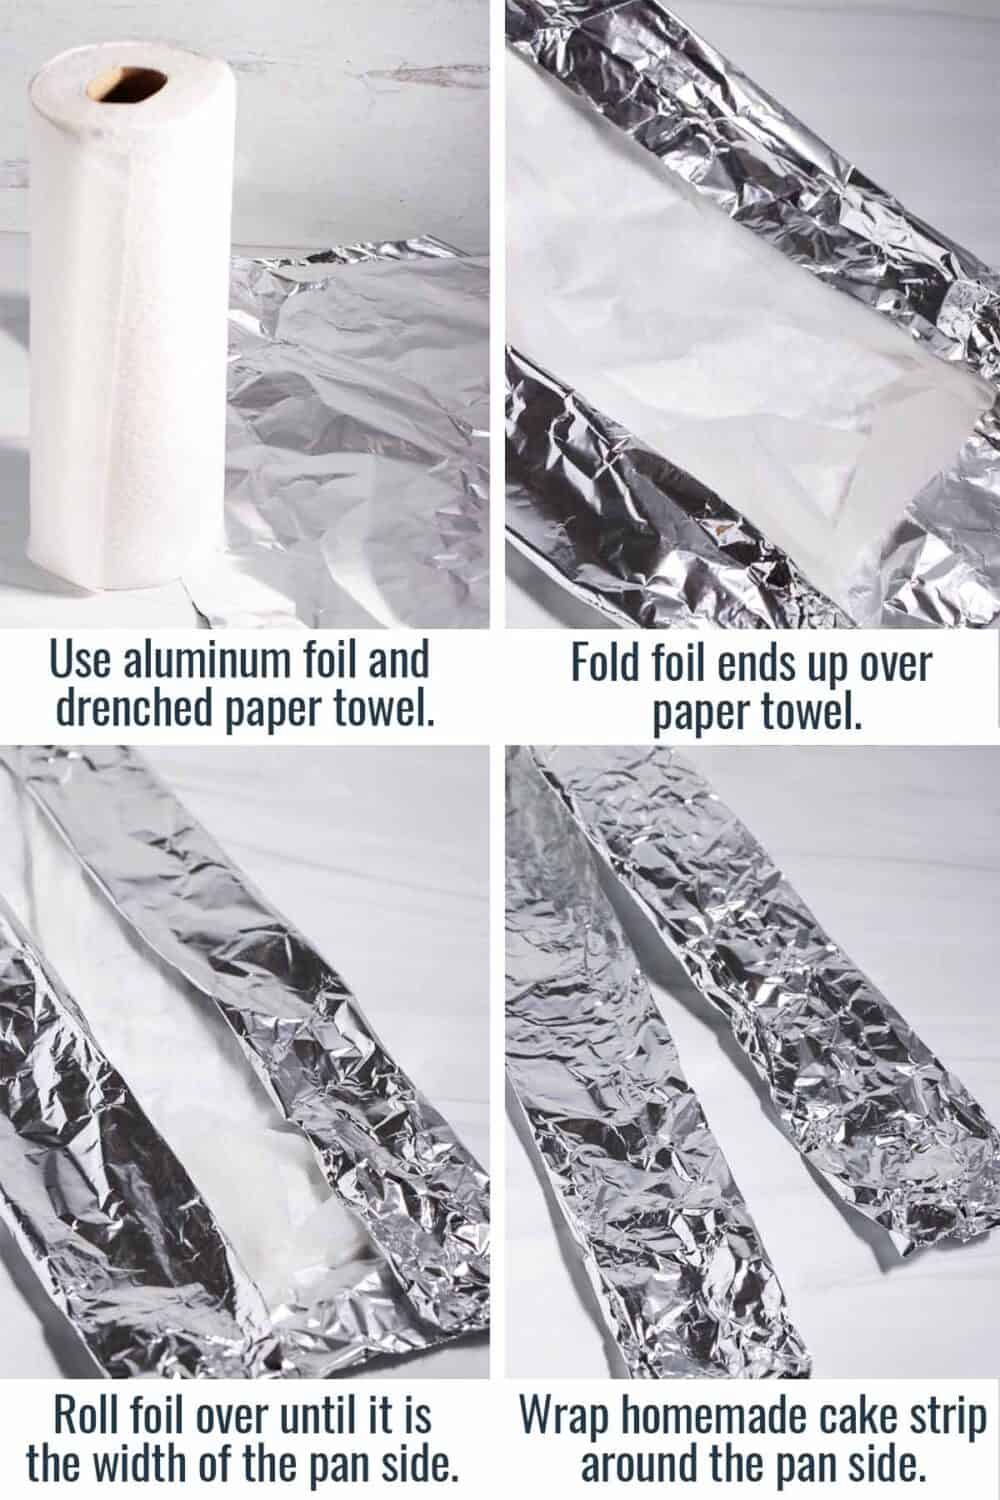 Steps showing how to make homemade cake strips with aluminum foil and paper towels.